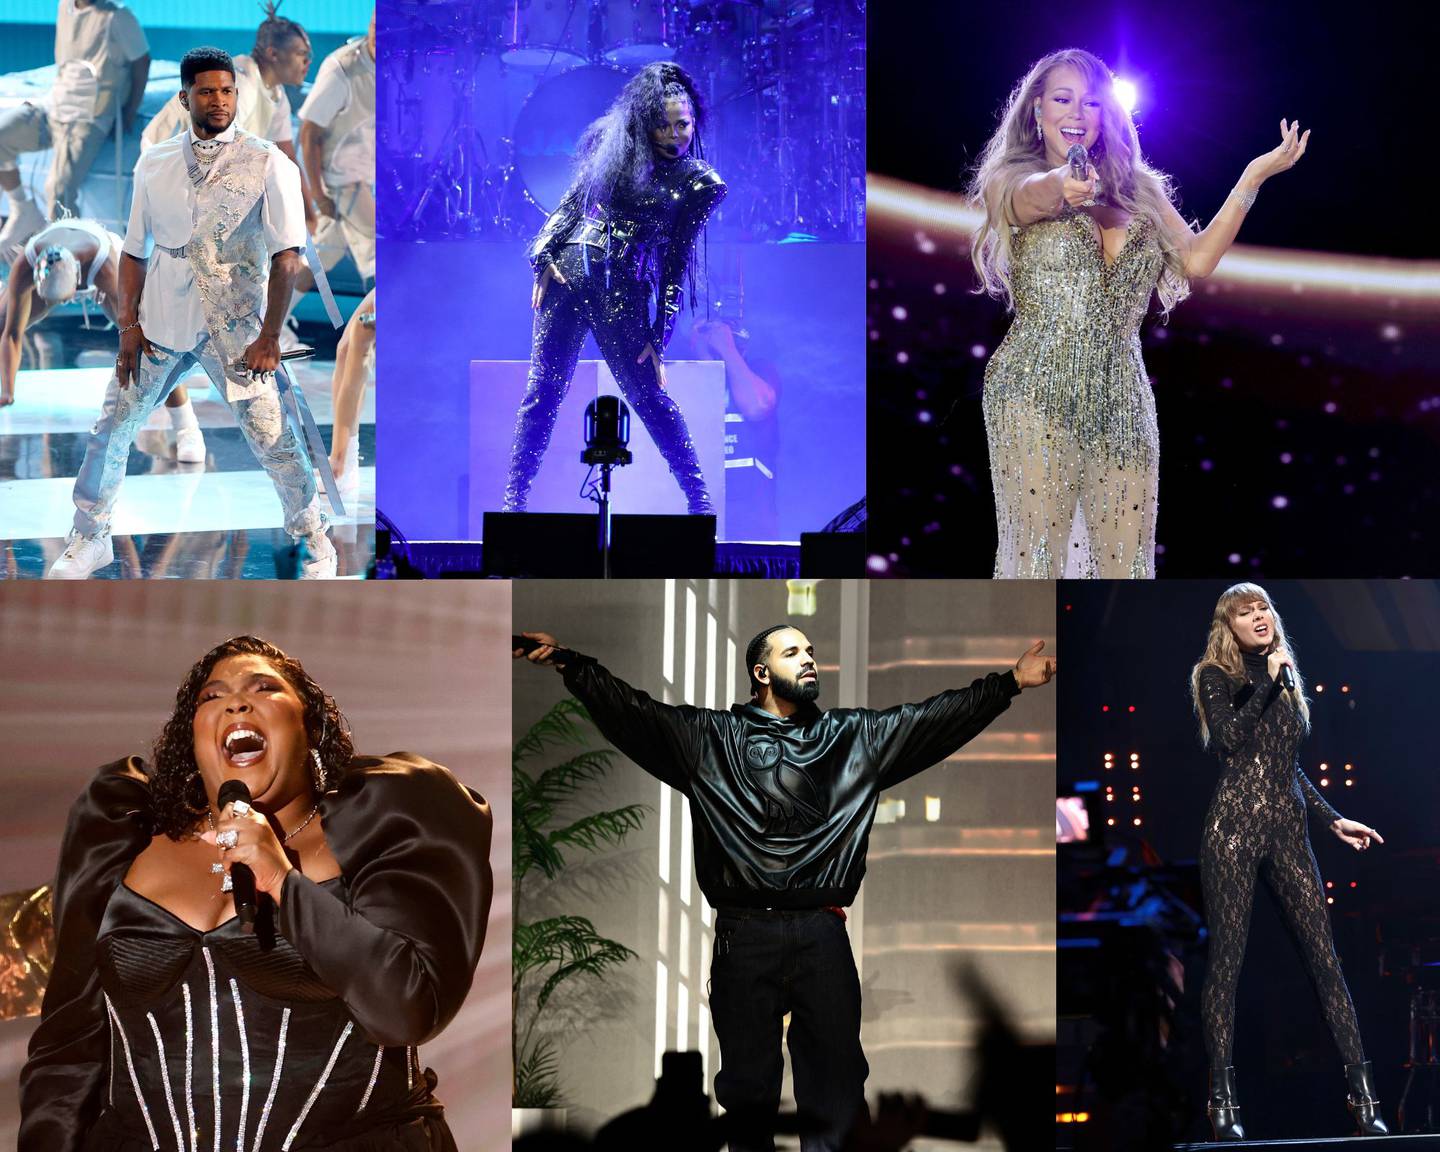 Potential artists who could headline next year's Super Bowl halftime show or in the near future.